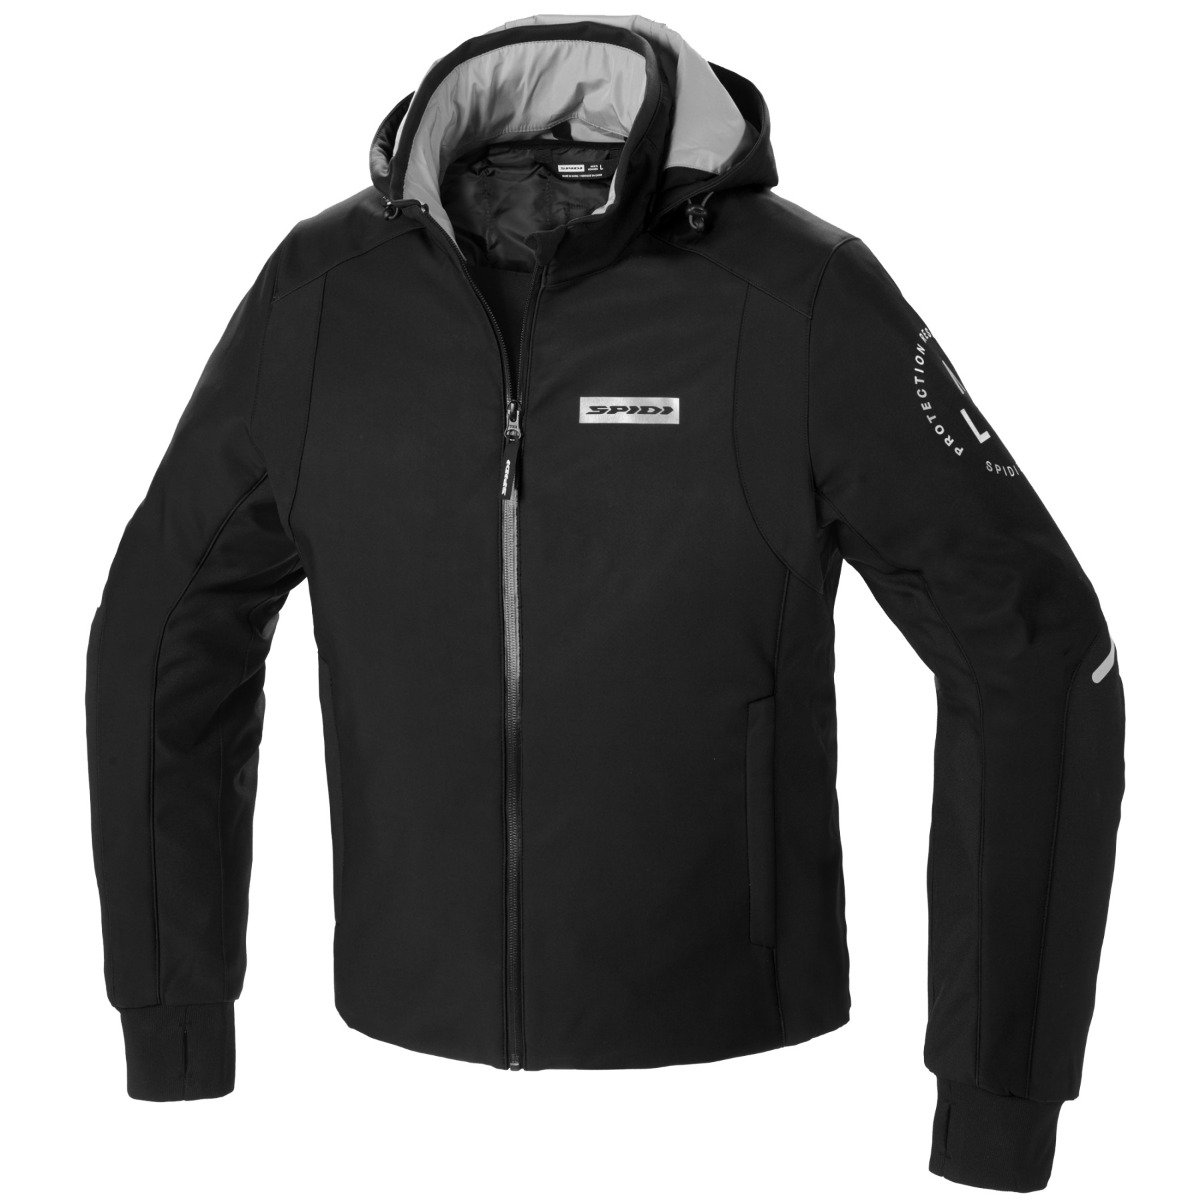 Image of Spidi Armor H2Out Jacket Black White Size M ID 8030161442205